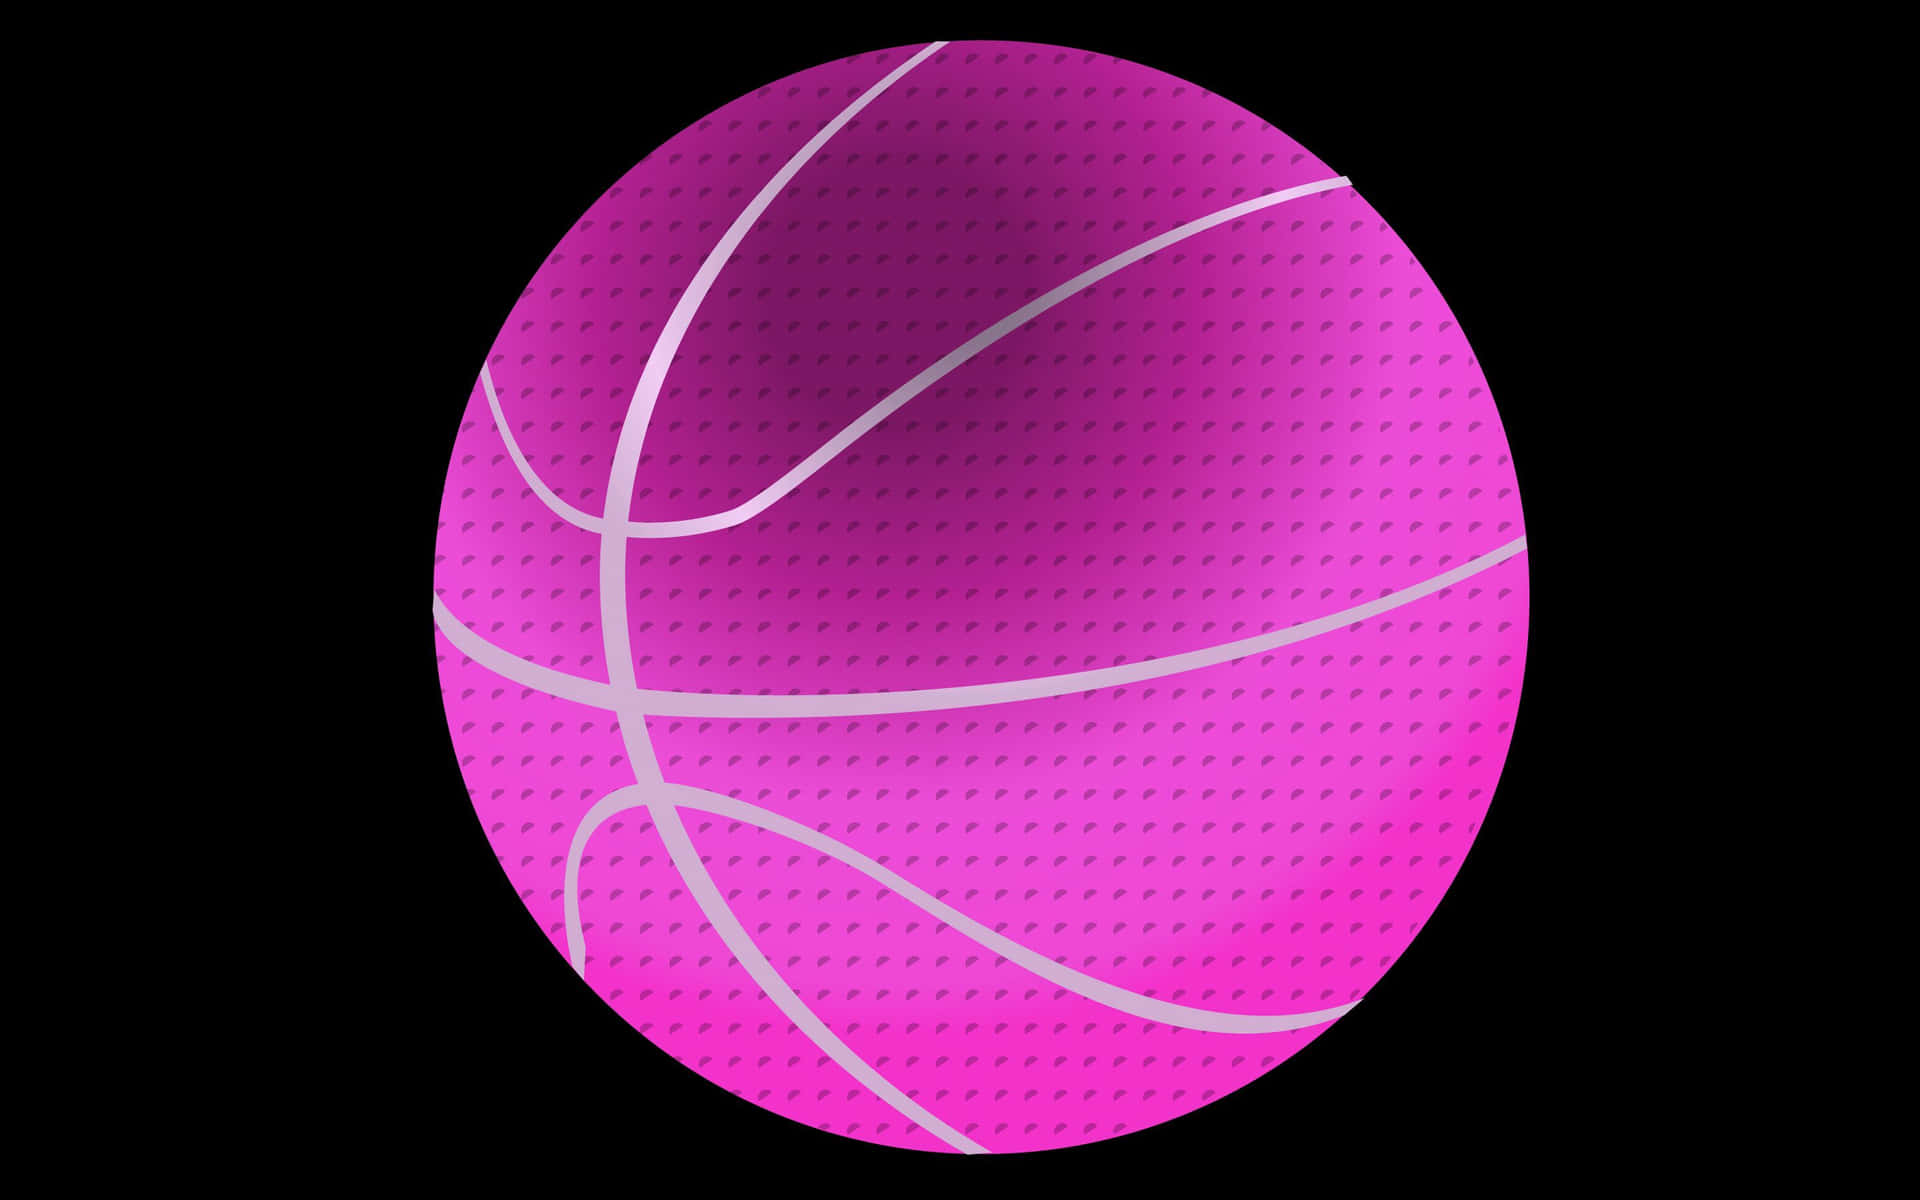 Get ready for the pink court! Wallpaper